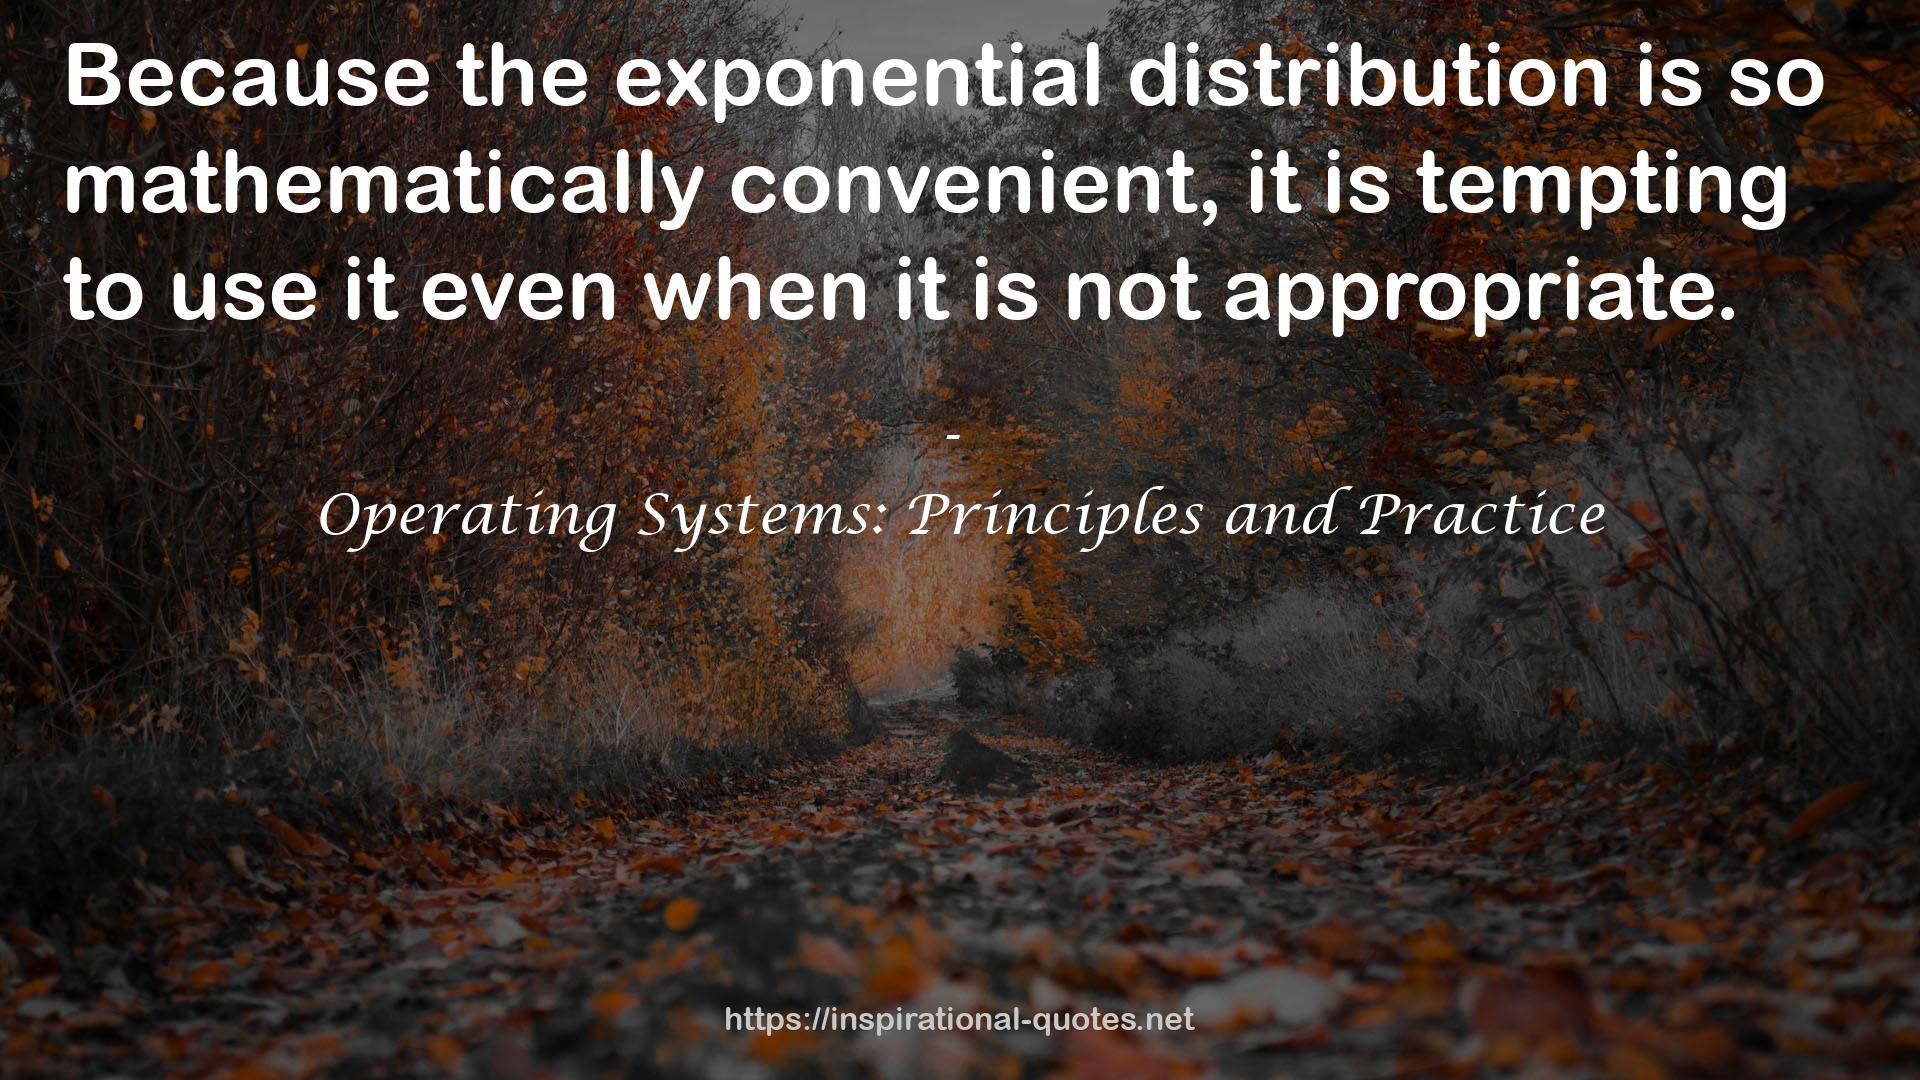 Operating Systems: Principles and Practice QUOTES